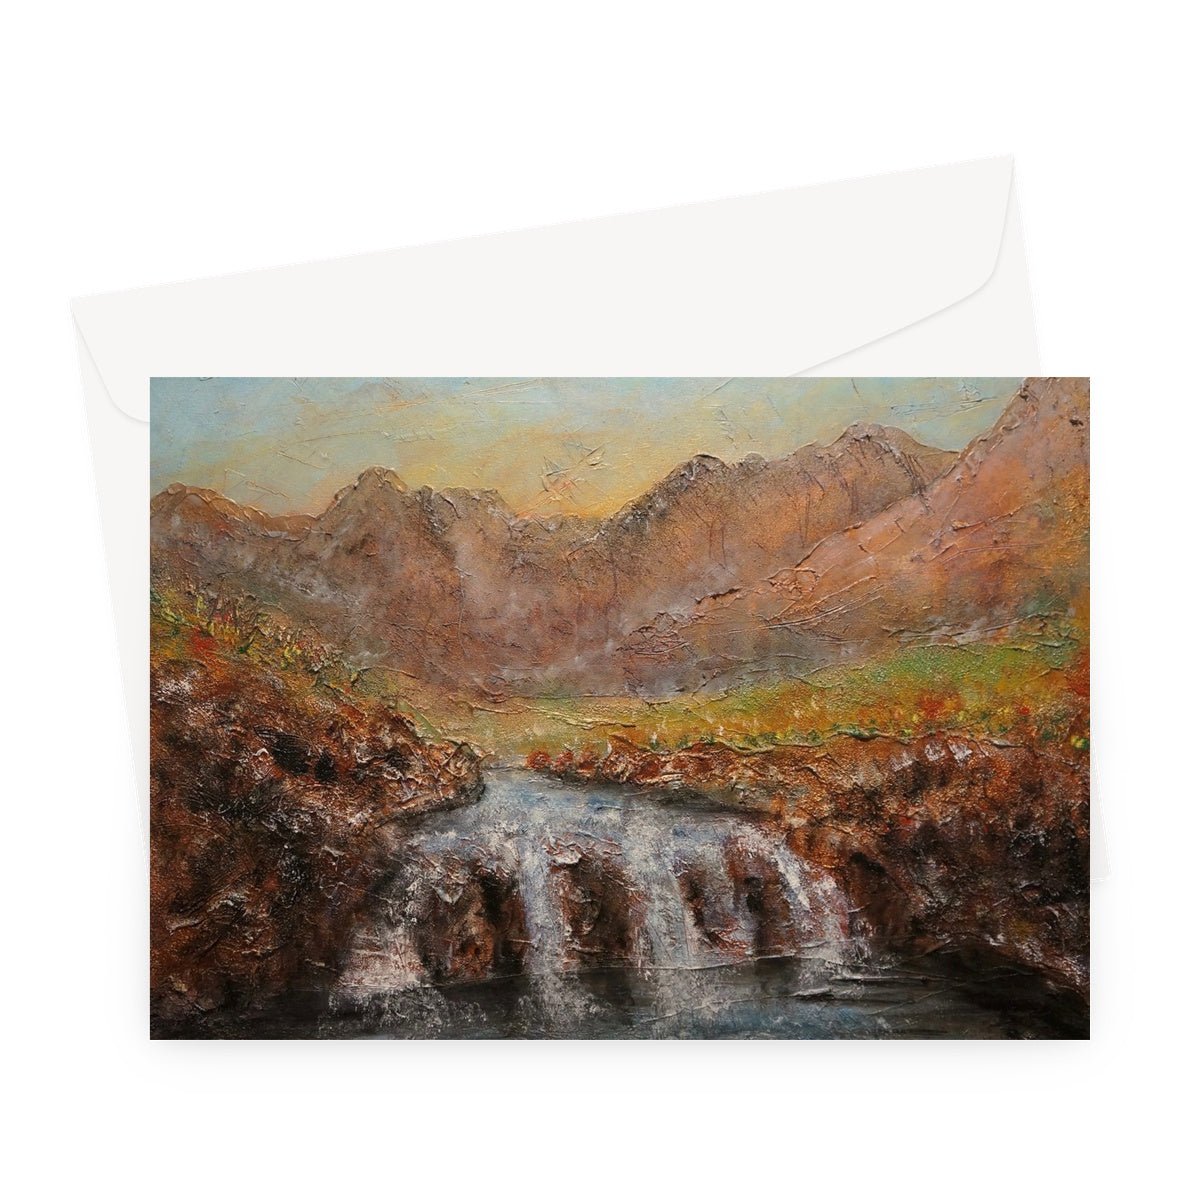 Fairy Pools Dawn Skye Art Gifts Greeting Card-Greetings Cards-Skye Art Gallery-A5 Landscape-1 Card-Paintings, Prints, Homeware, Art Gifts From Scotland By Scottish Artist Kevin Hunter